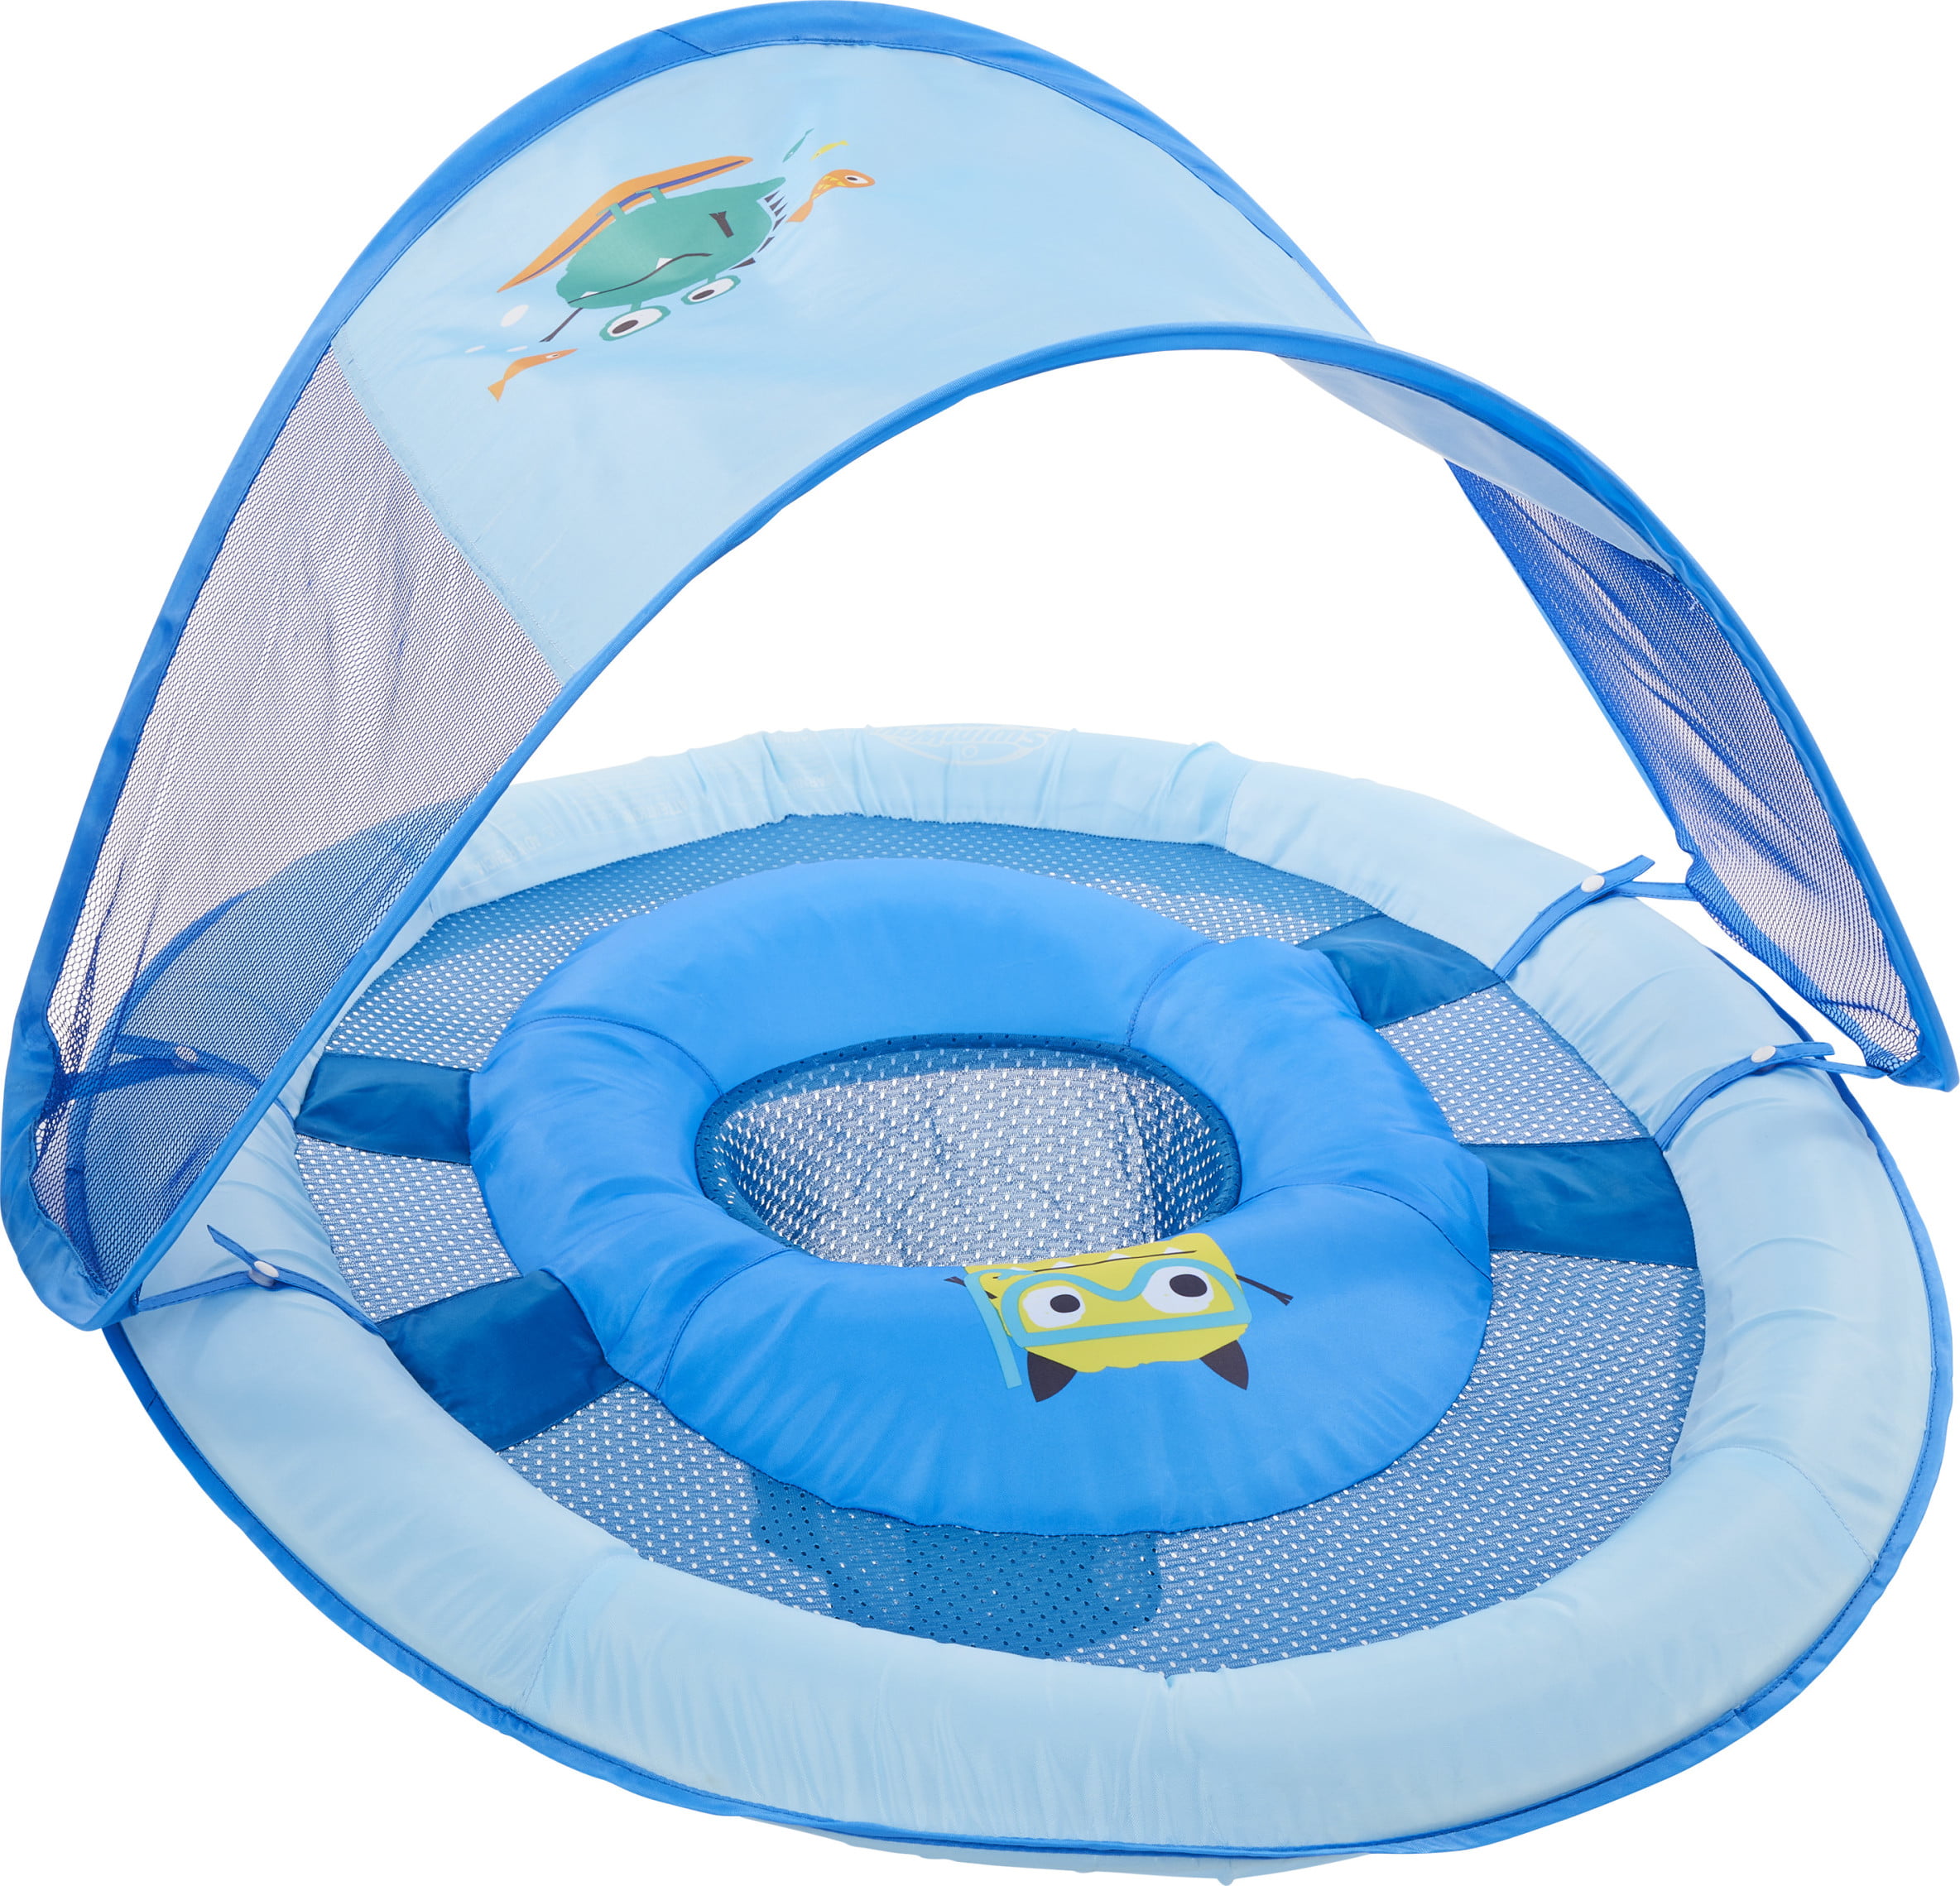 Baby Kids Toddler Swimming Pool Water Inflatable Swim Circle Float Seat Canopy 